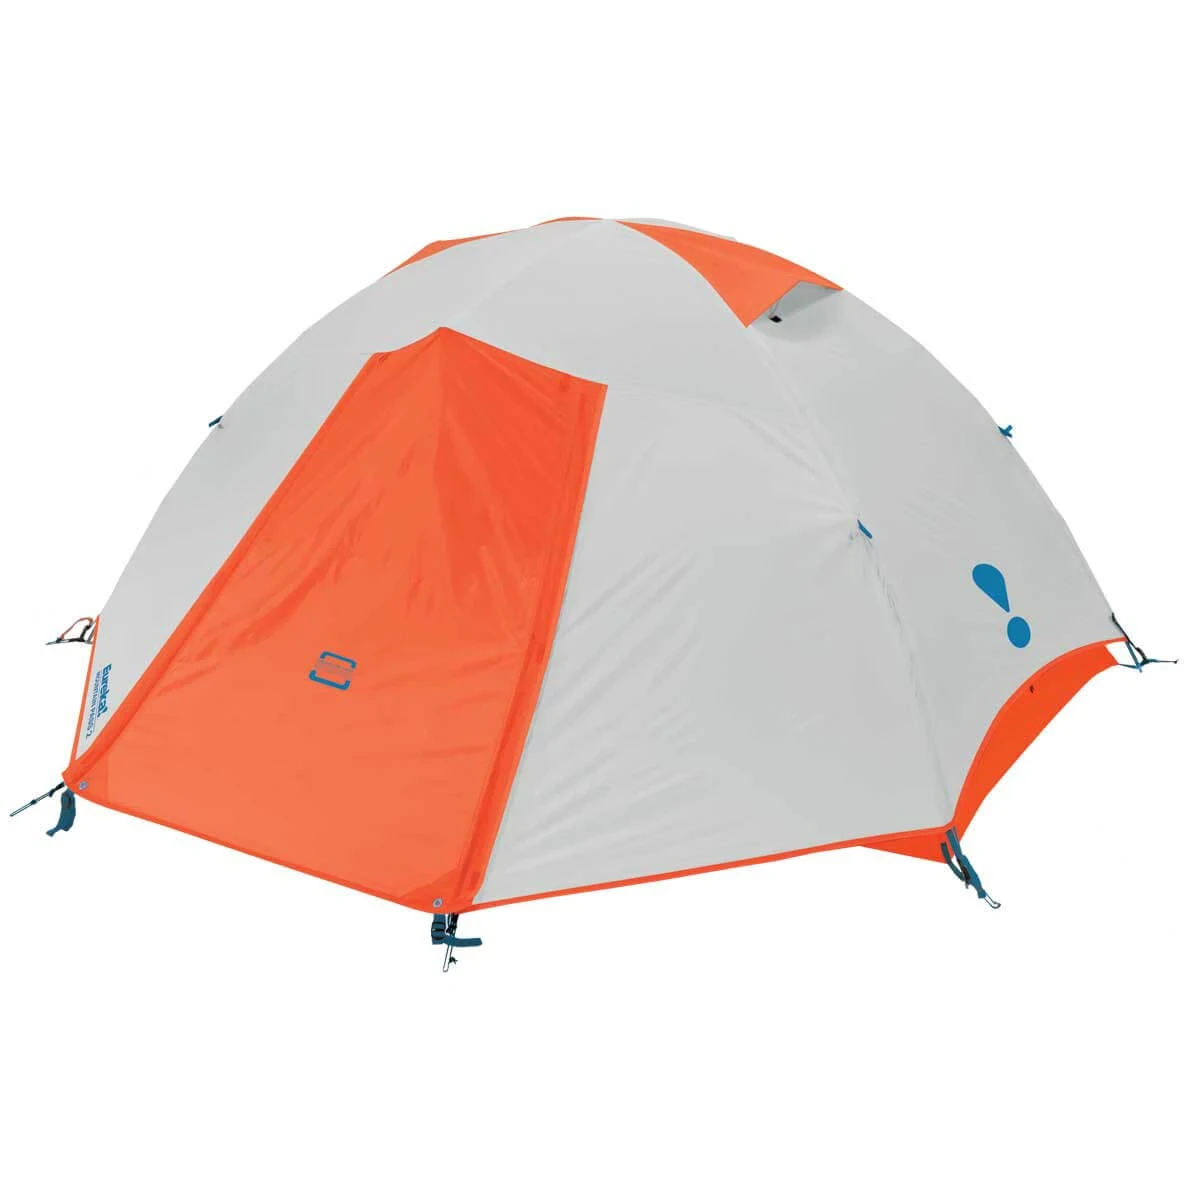 Mountain Pass 2 person tent with rainfly